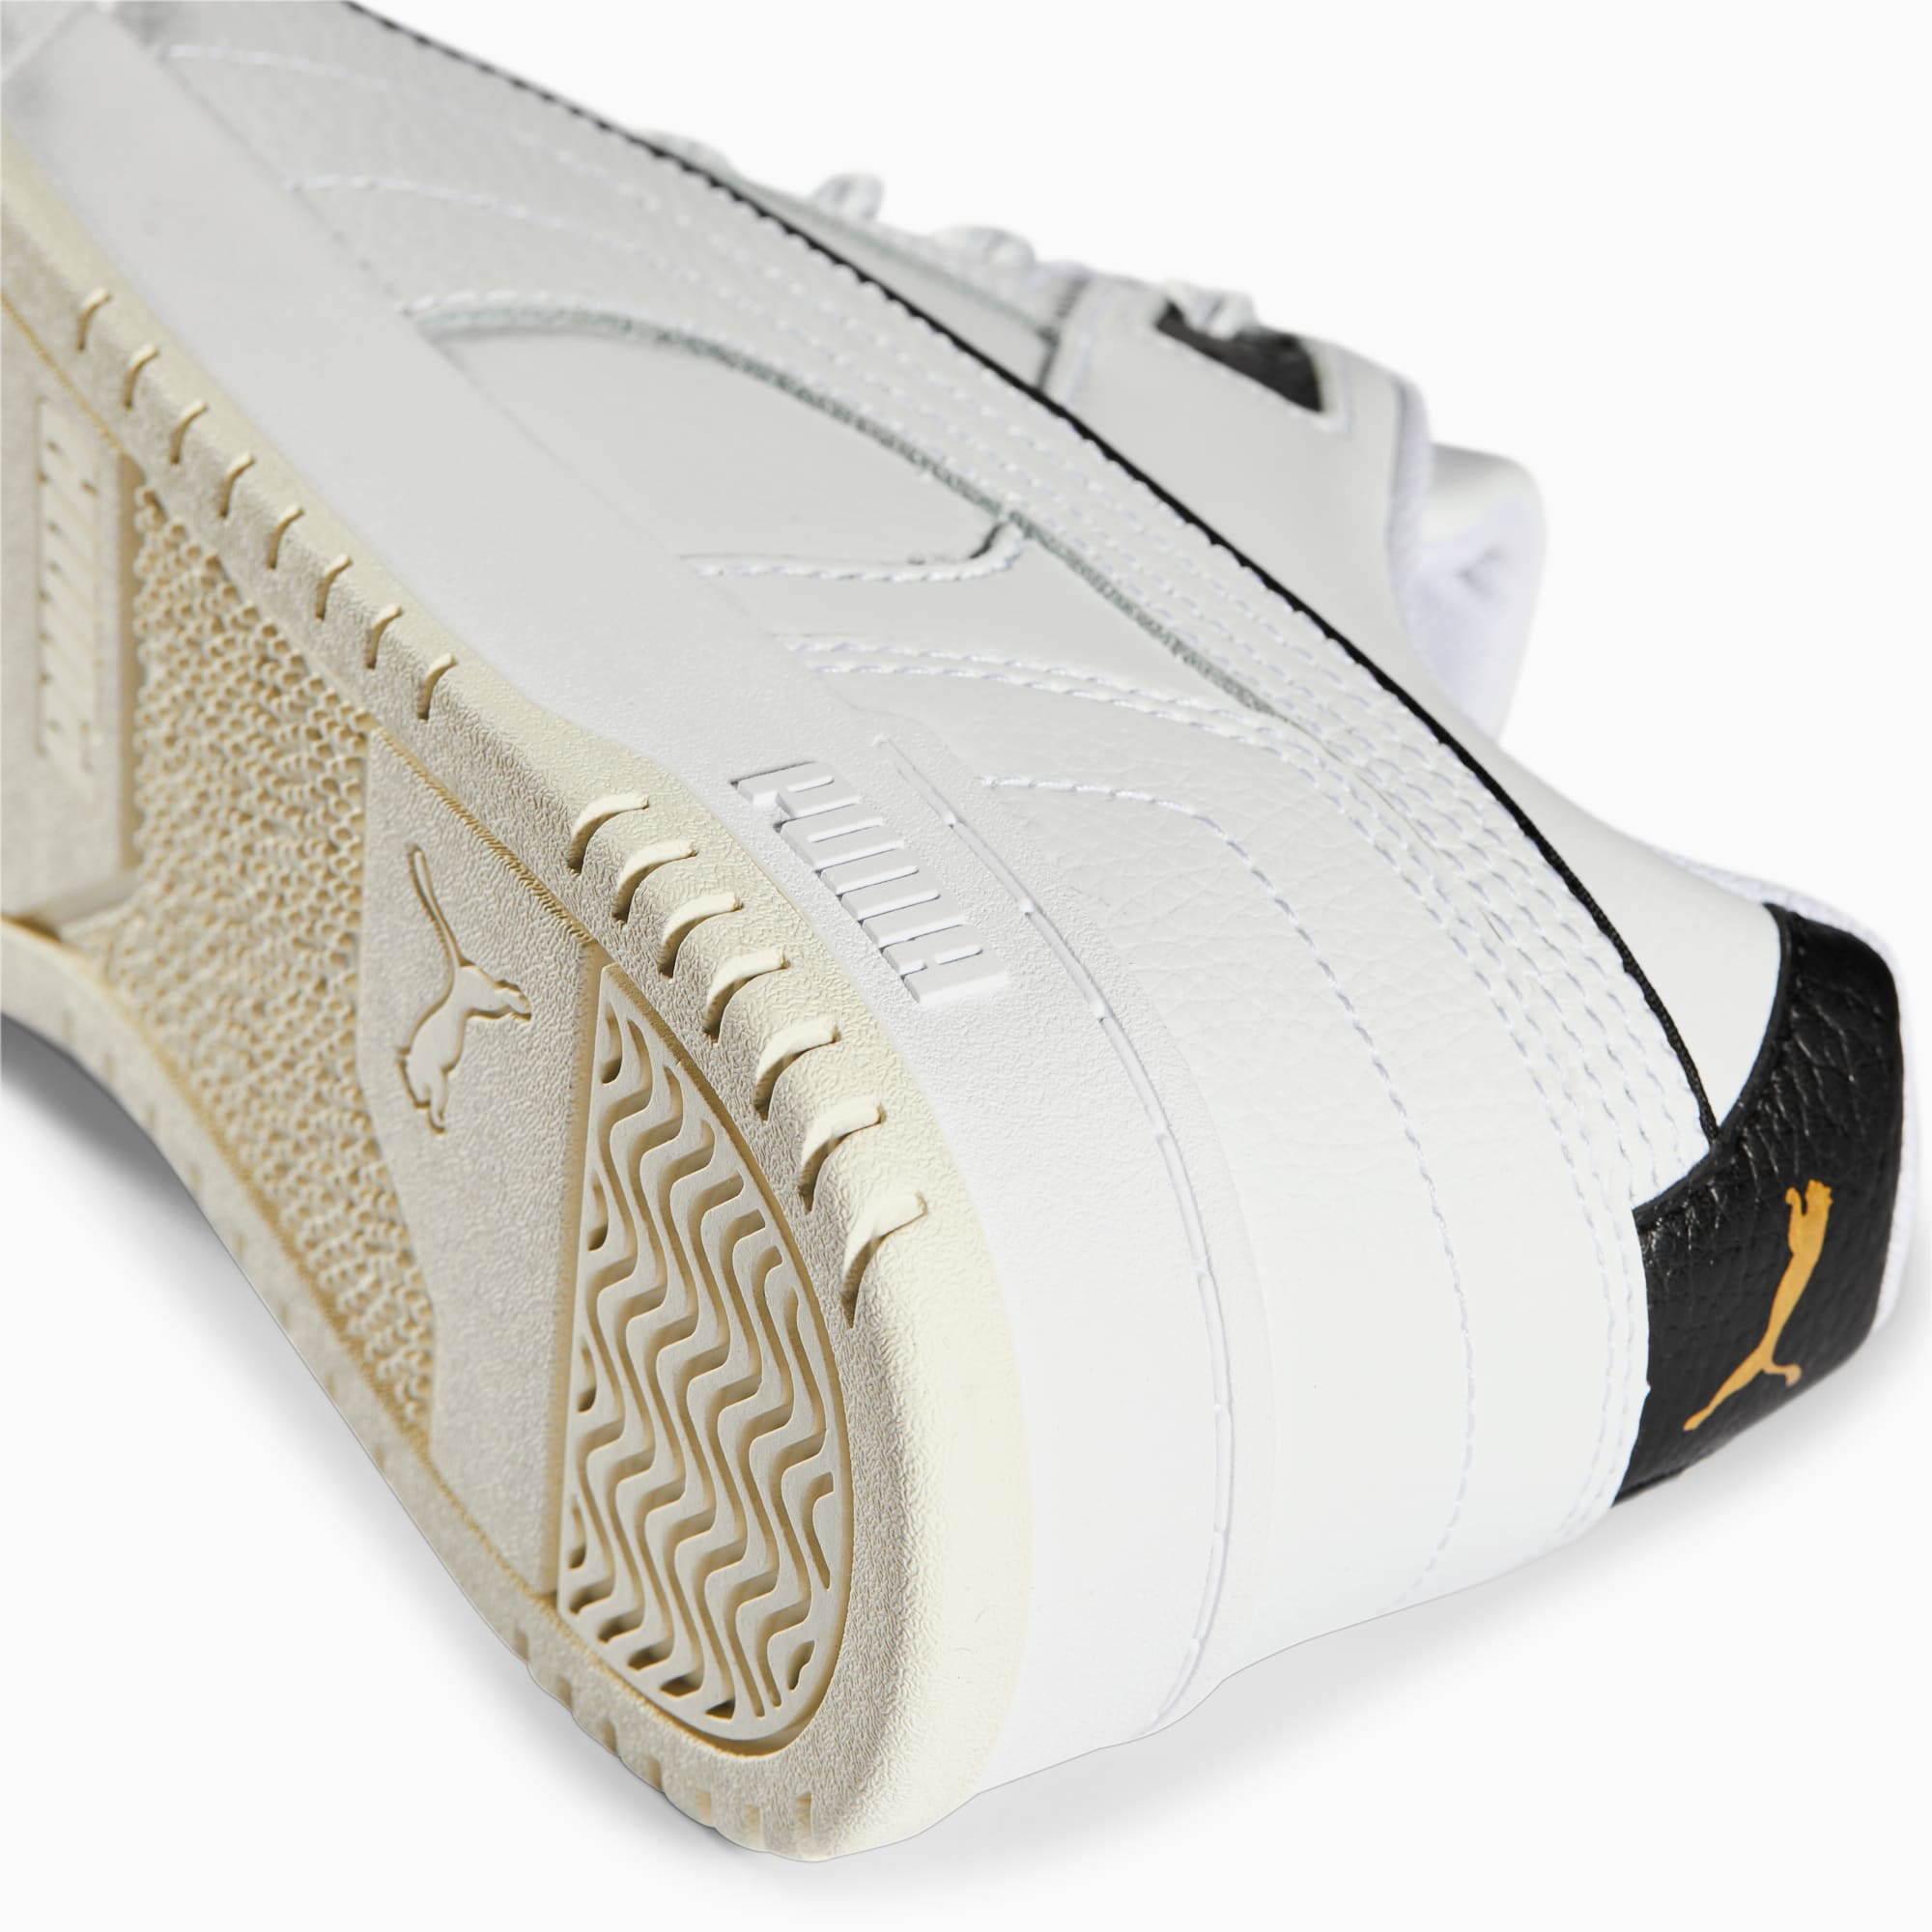 Women's PUMA Rbd Game Low Sneakers, White/Black/Gold, Size 35,5, Shoes